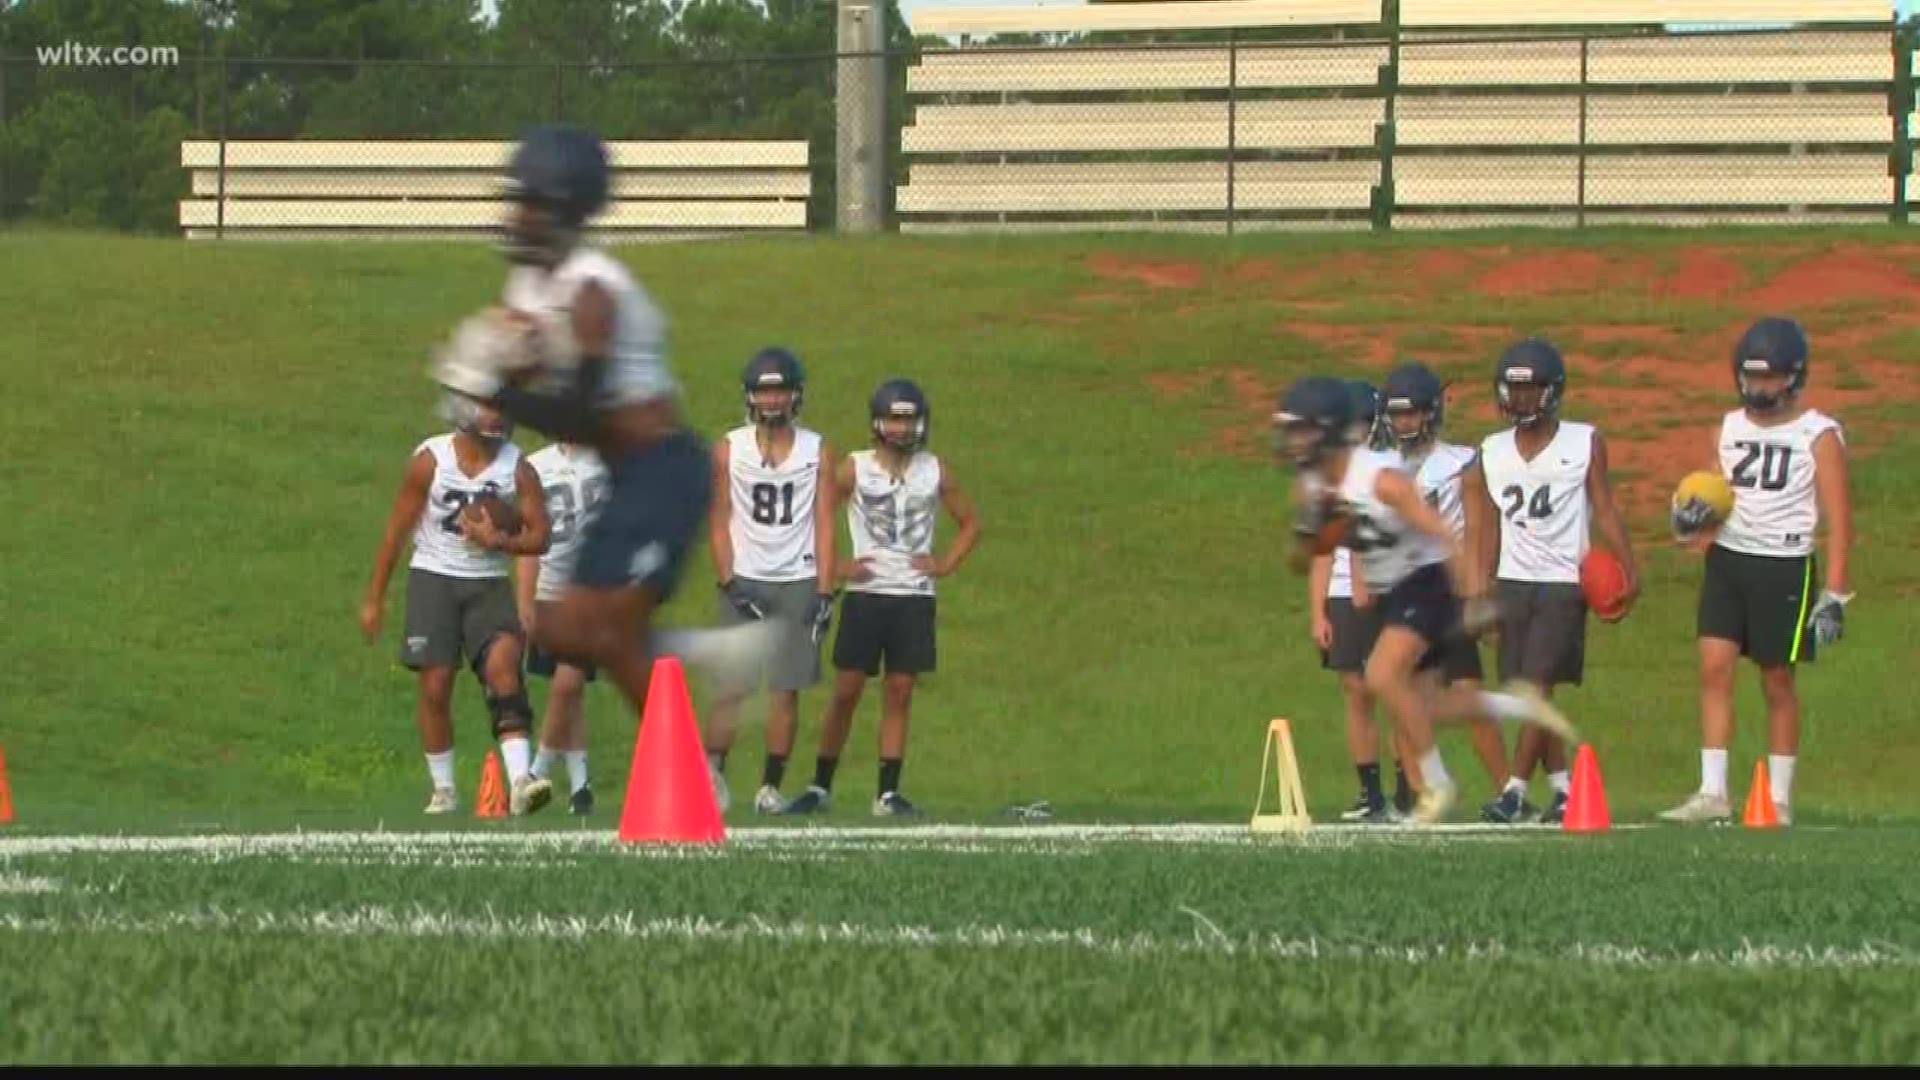 Chapin High School continues to grow and with that comes a move for athletic teams from Class AAAA to AAAAA.